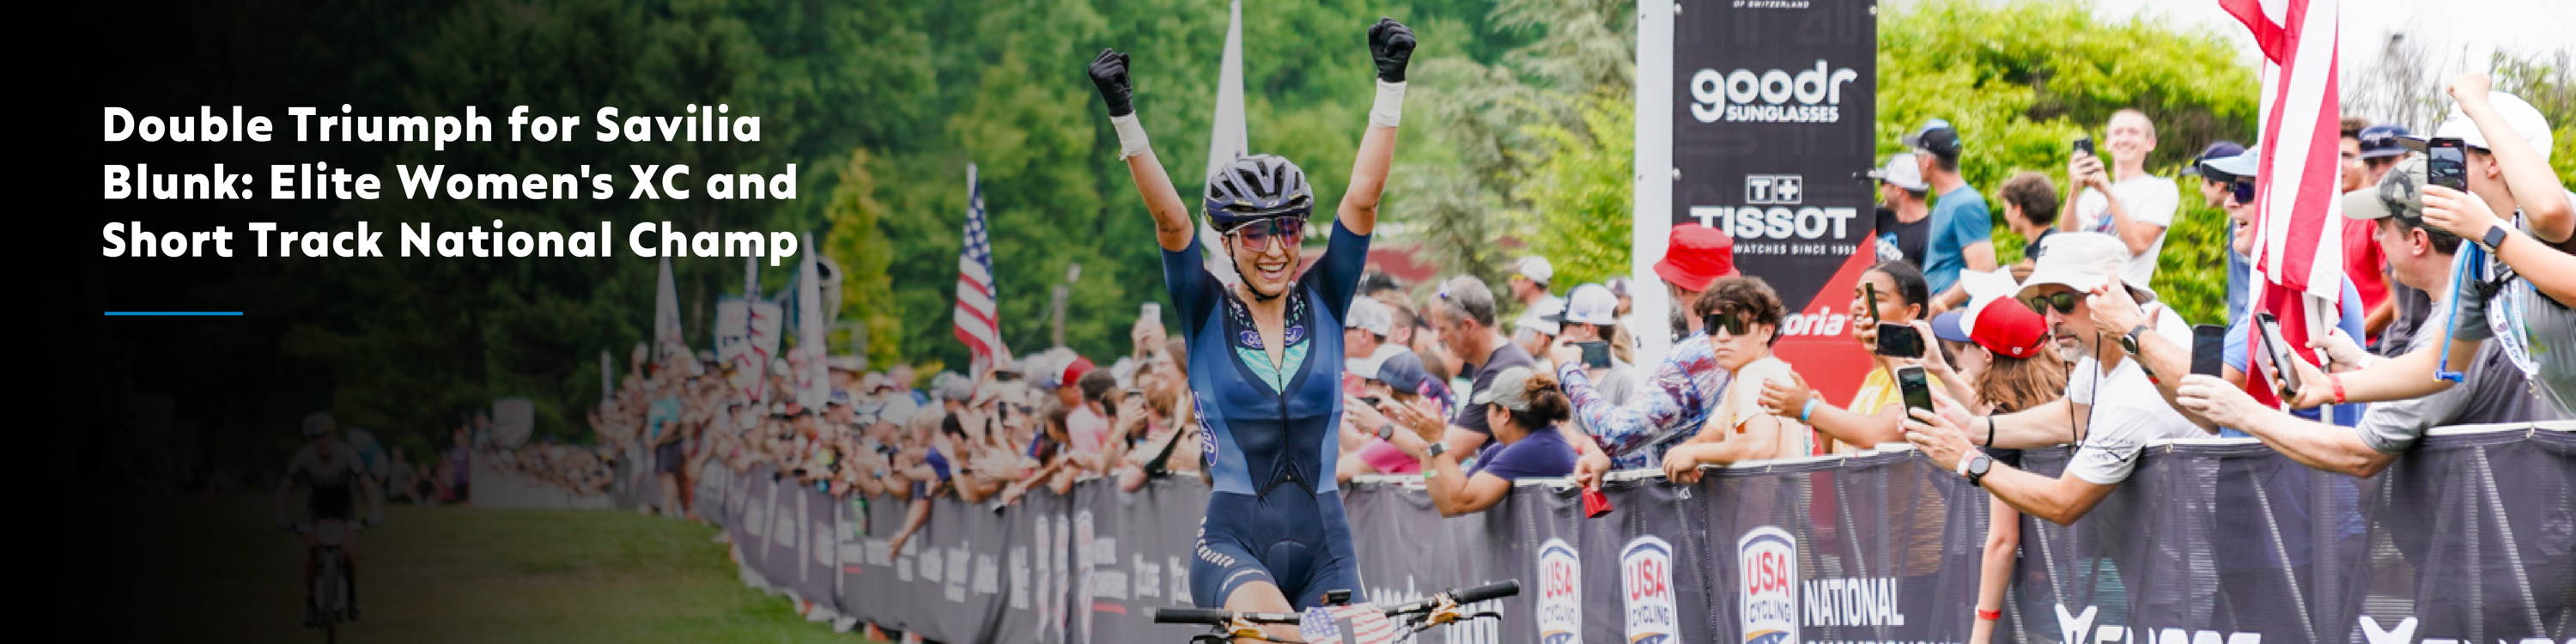 Double Triumph for Savilia Blunk: Elite Women's XC and Short Track National Champ